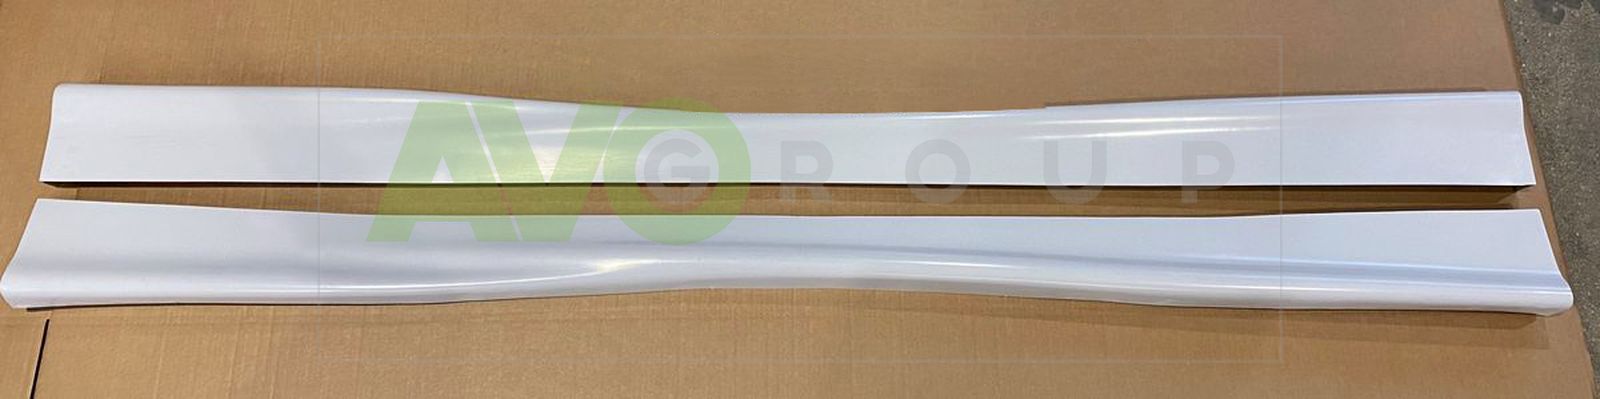 DTM Side skirts / Sill covers for AUDI 80 B3 / B4 1986-1996